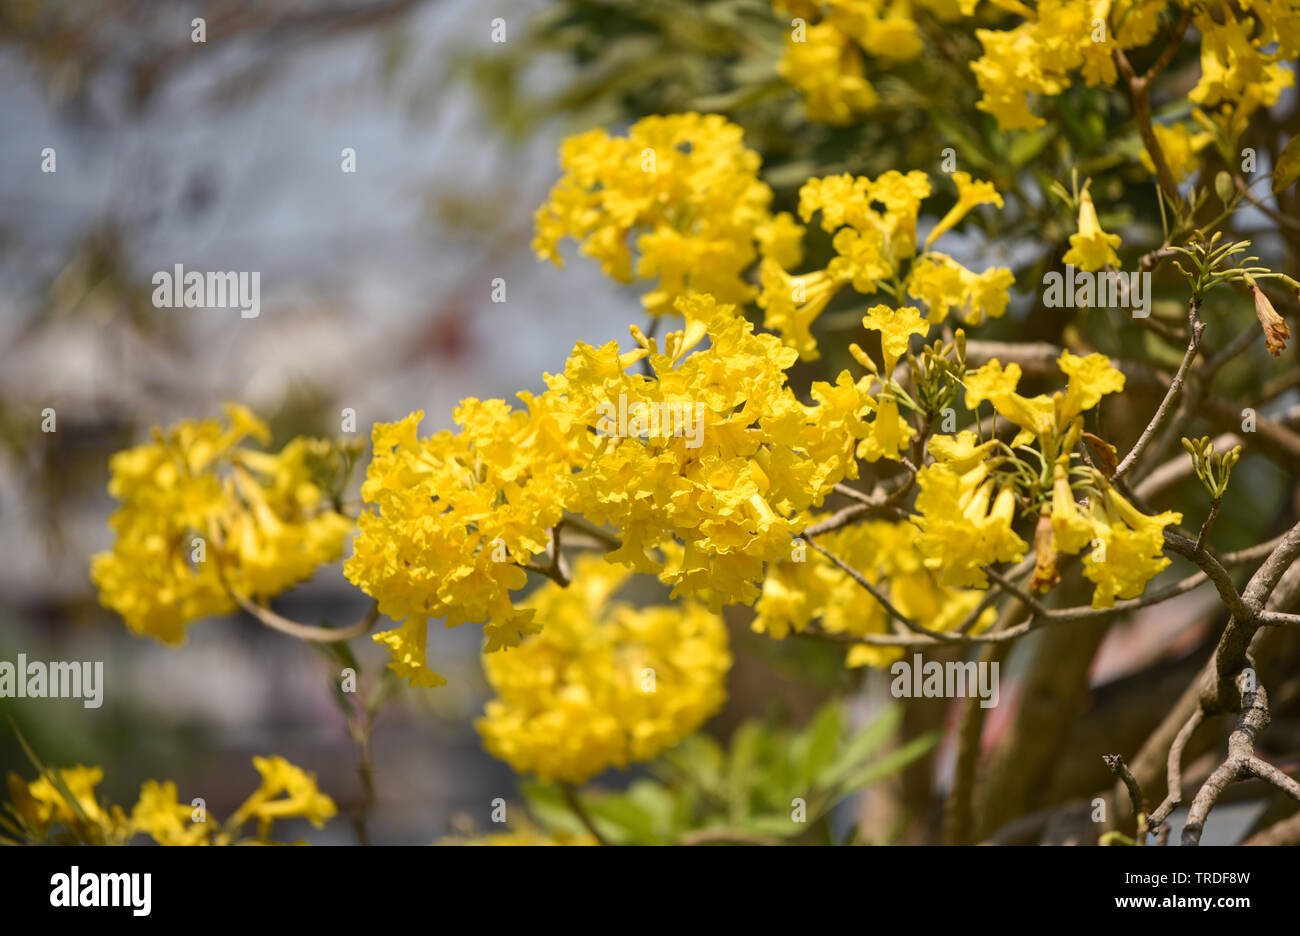 Yellow flowers tree tabebuia spectabilis / Goldentree in the park Stock Photo